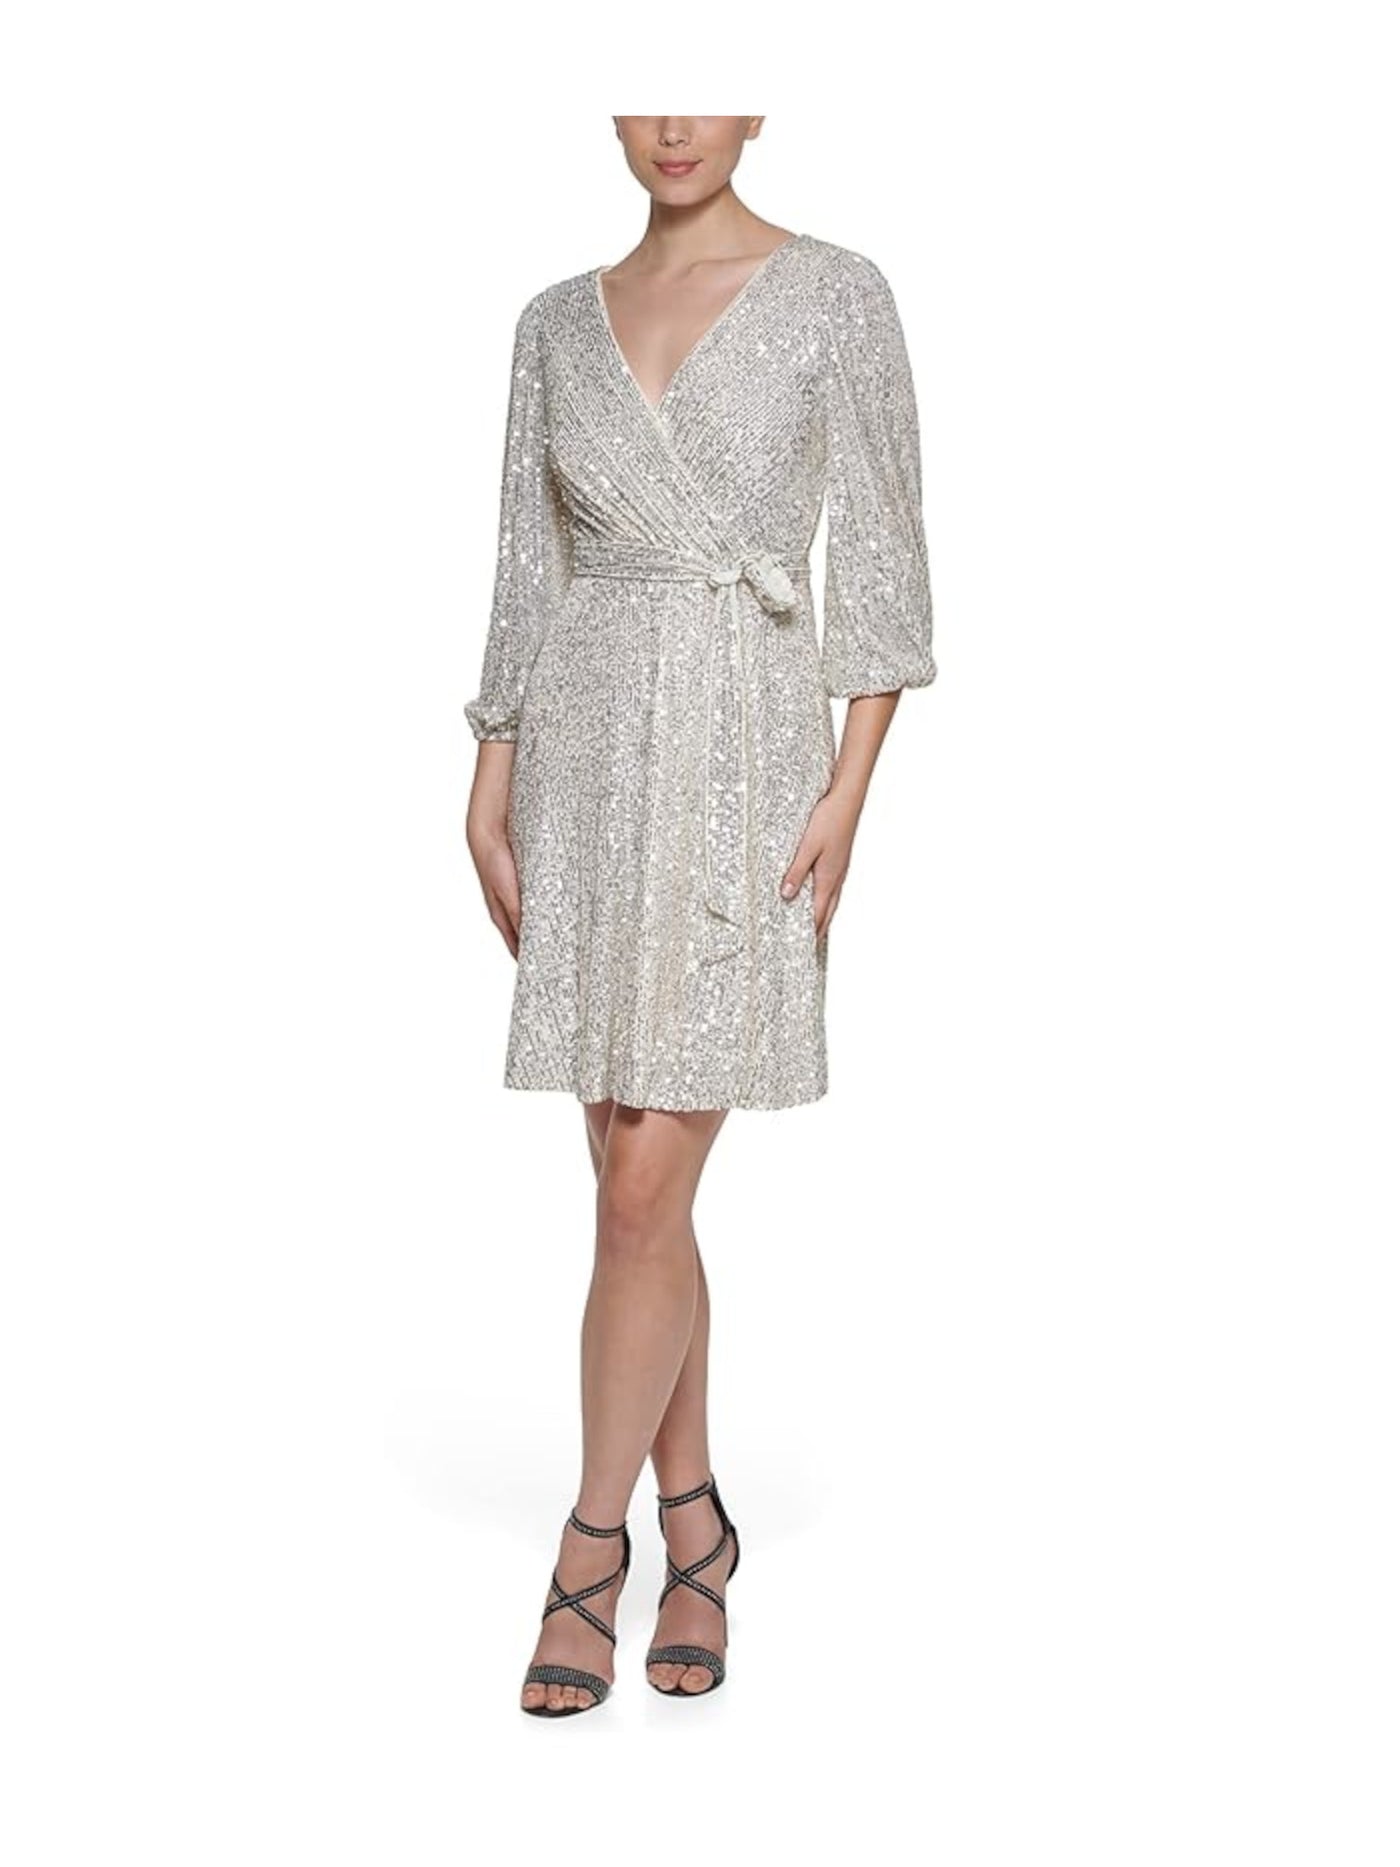 DKNY Womens Silver Zippered Sequined Lined Sheer Tie Belt 3/4 Sleeve Surplice Neckline Knee Length Evening Fit + Flare Dress 12